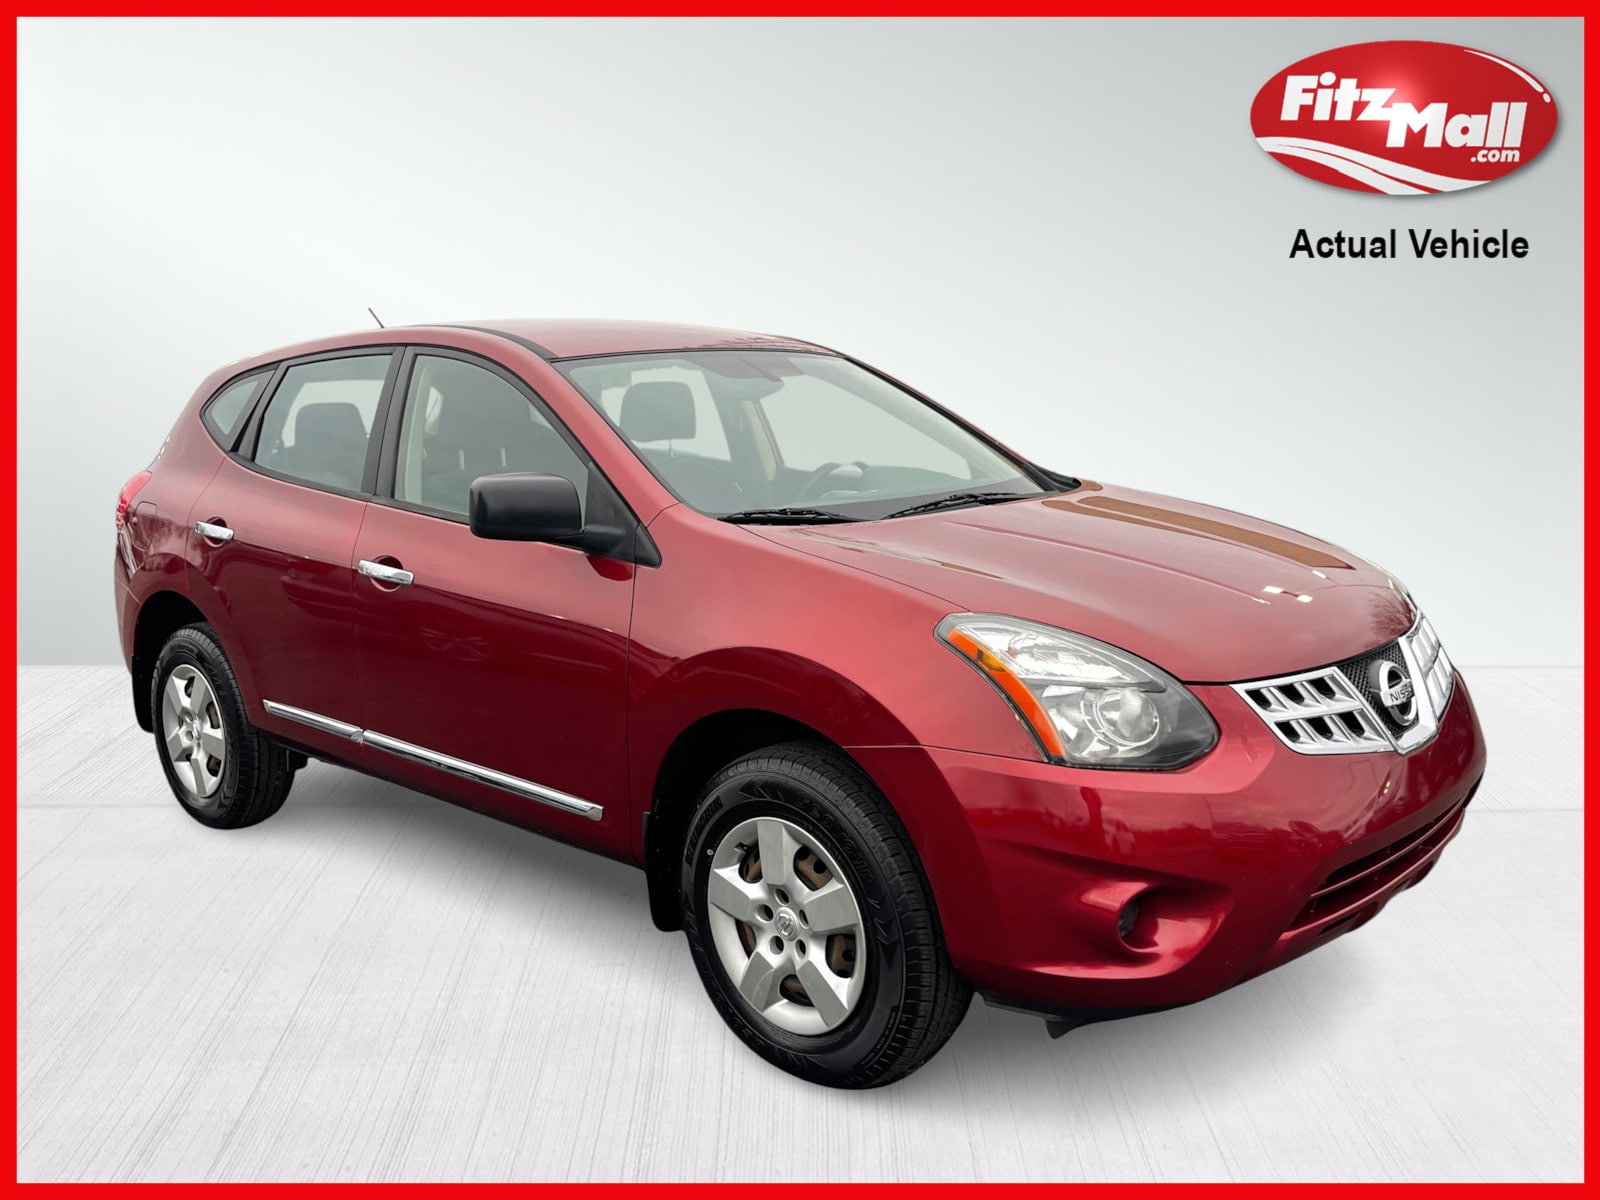 Used 2014 Nissan Rogue Select For Sale at Fitzgerald Mazda of Annapolis |  VIN: JN8AS5MV7EW705646